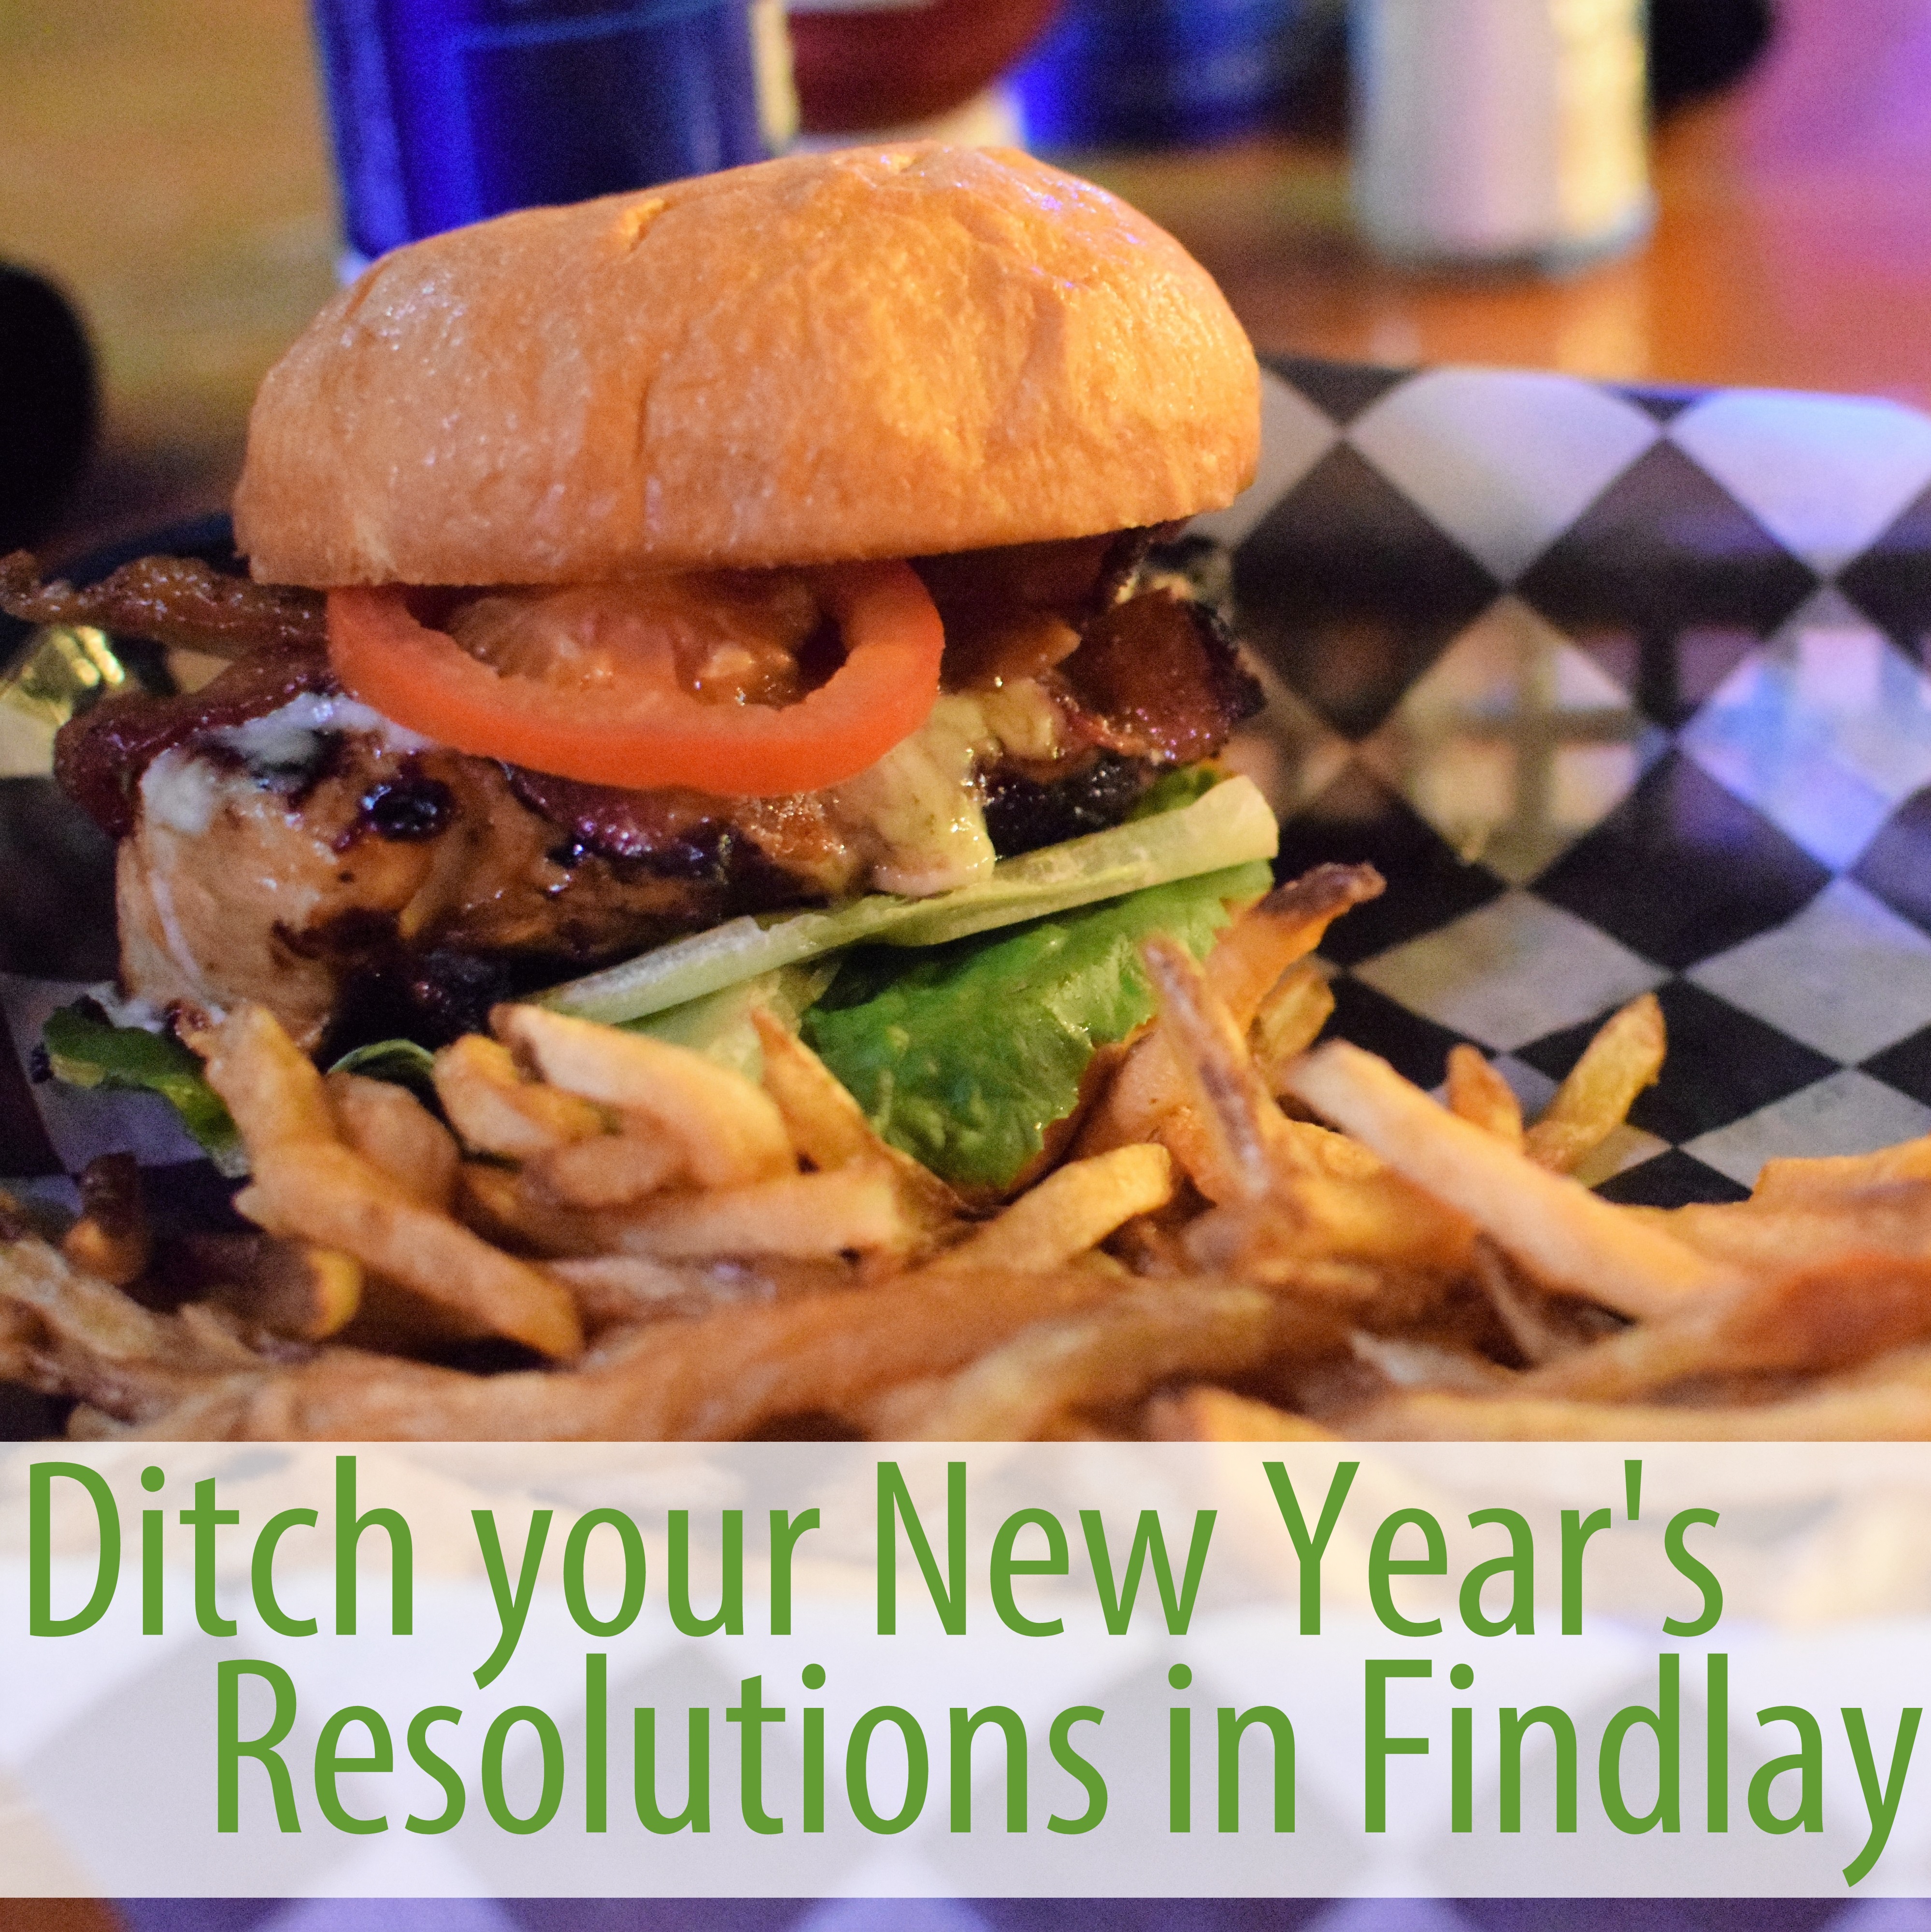 New Year's Resolutions are hard to keep, so ditch them! Check out our suggestions on where to do just that in Findlay. • VisitFindlay.com